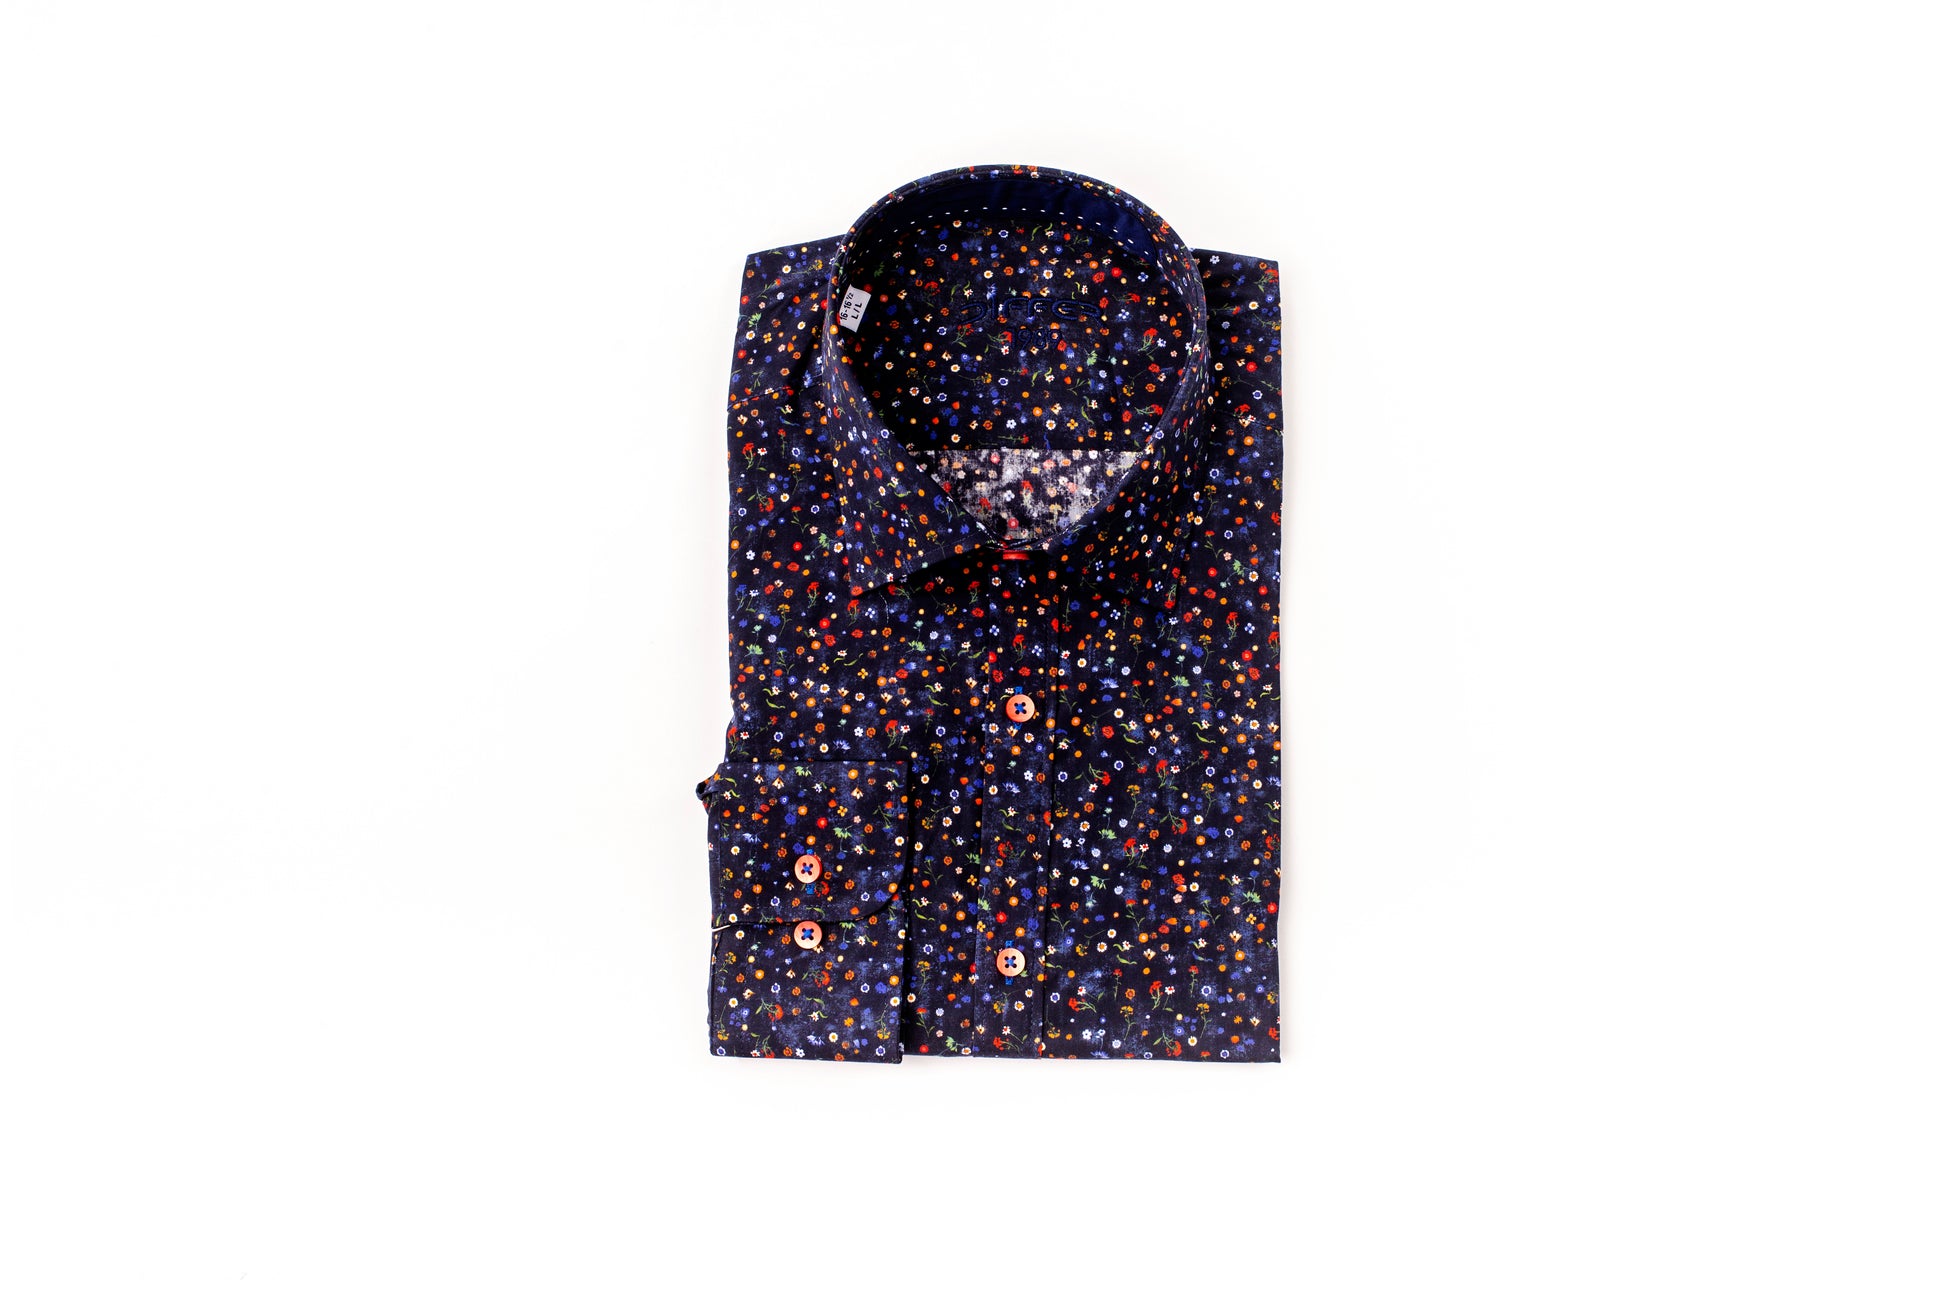 Differ 1989 Navy Floral Dress Shirt, cotton, semi-slim, that can be easily paired with jeans and suits